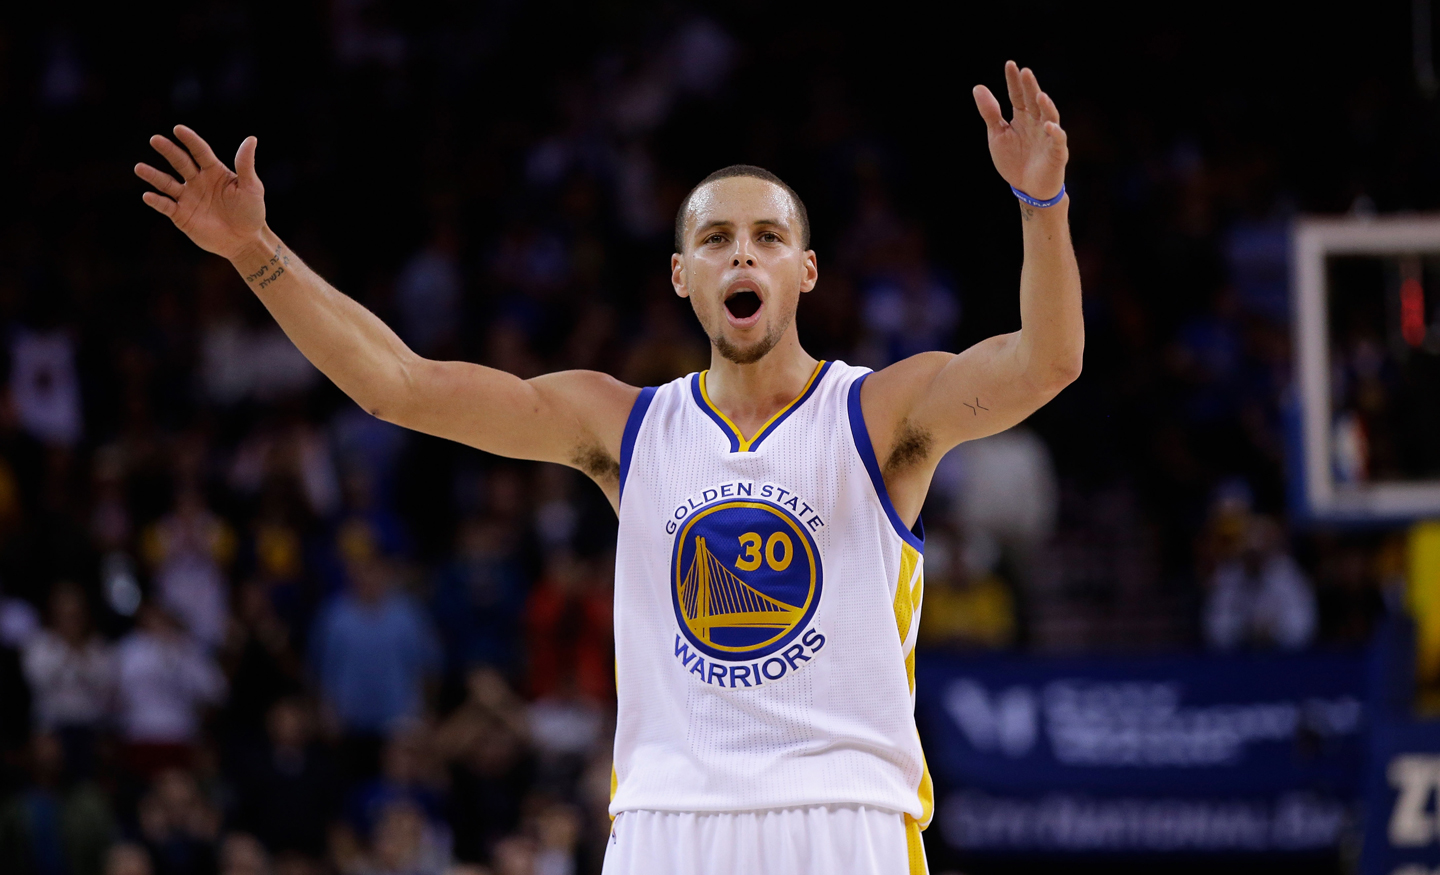 Stephen Curry tries to get the crowd louder during the fourth quarter of their game against the Houston Rockets at ORACLE Arena on December 10, 2014 in Oakland, California. (Ezra Shaw/Getty Images)